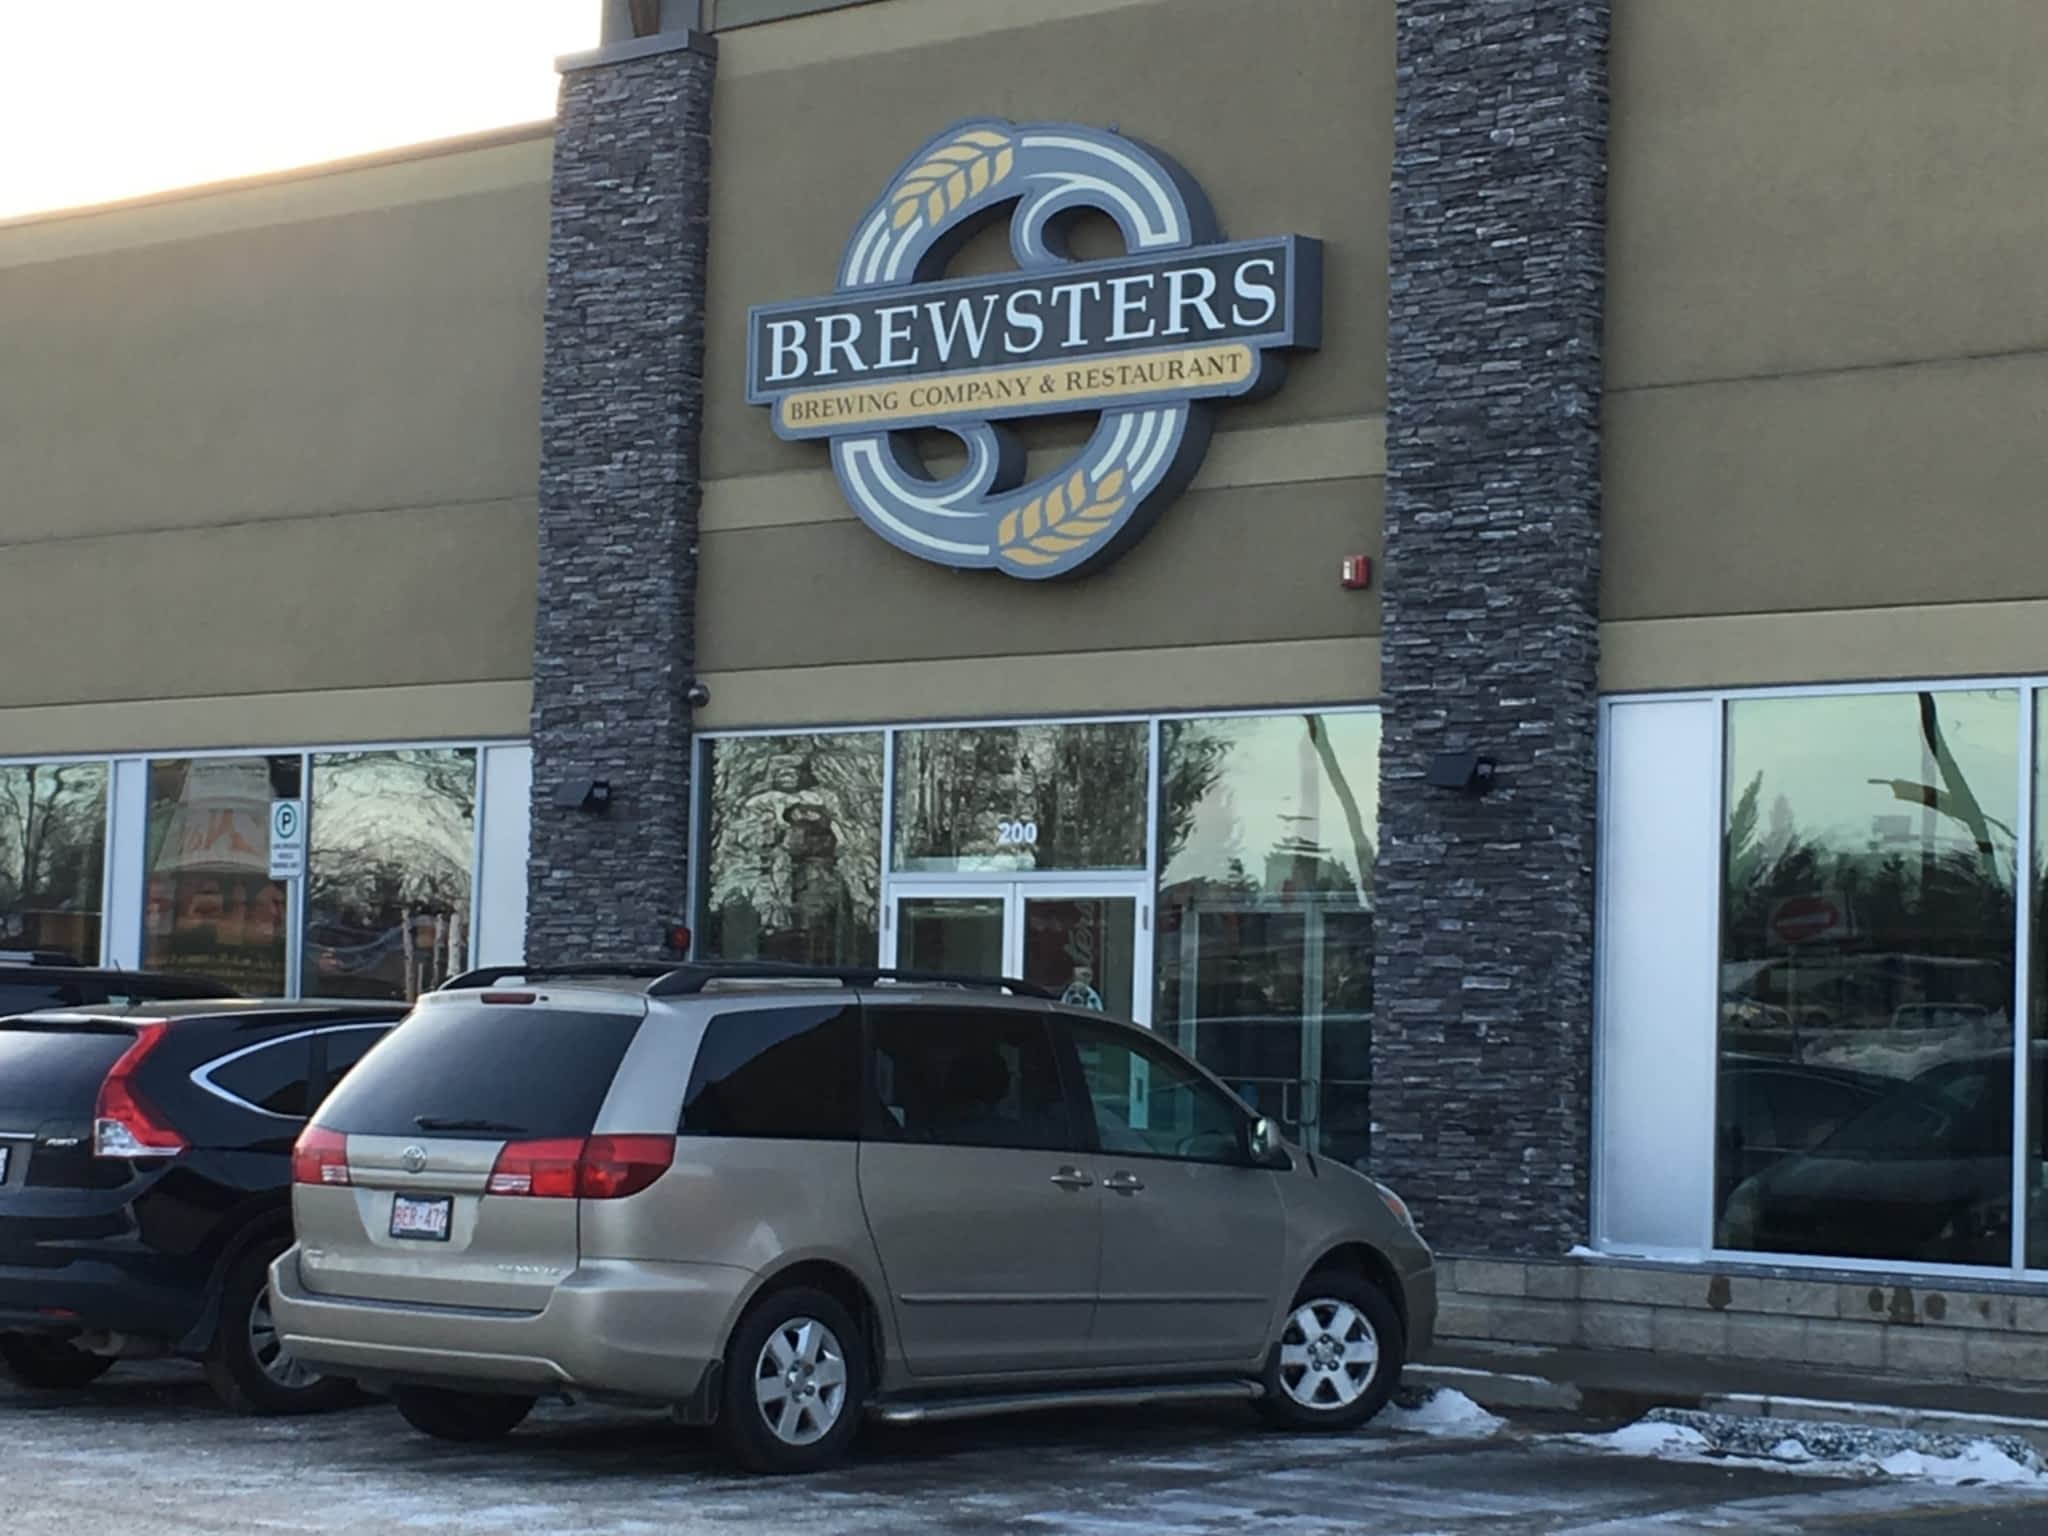 photo Brewsters Brewing Co & Restaurant